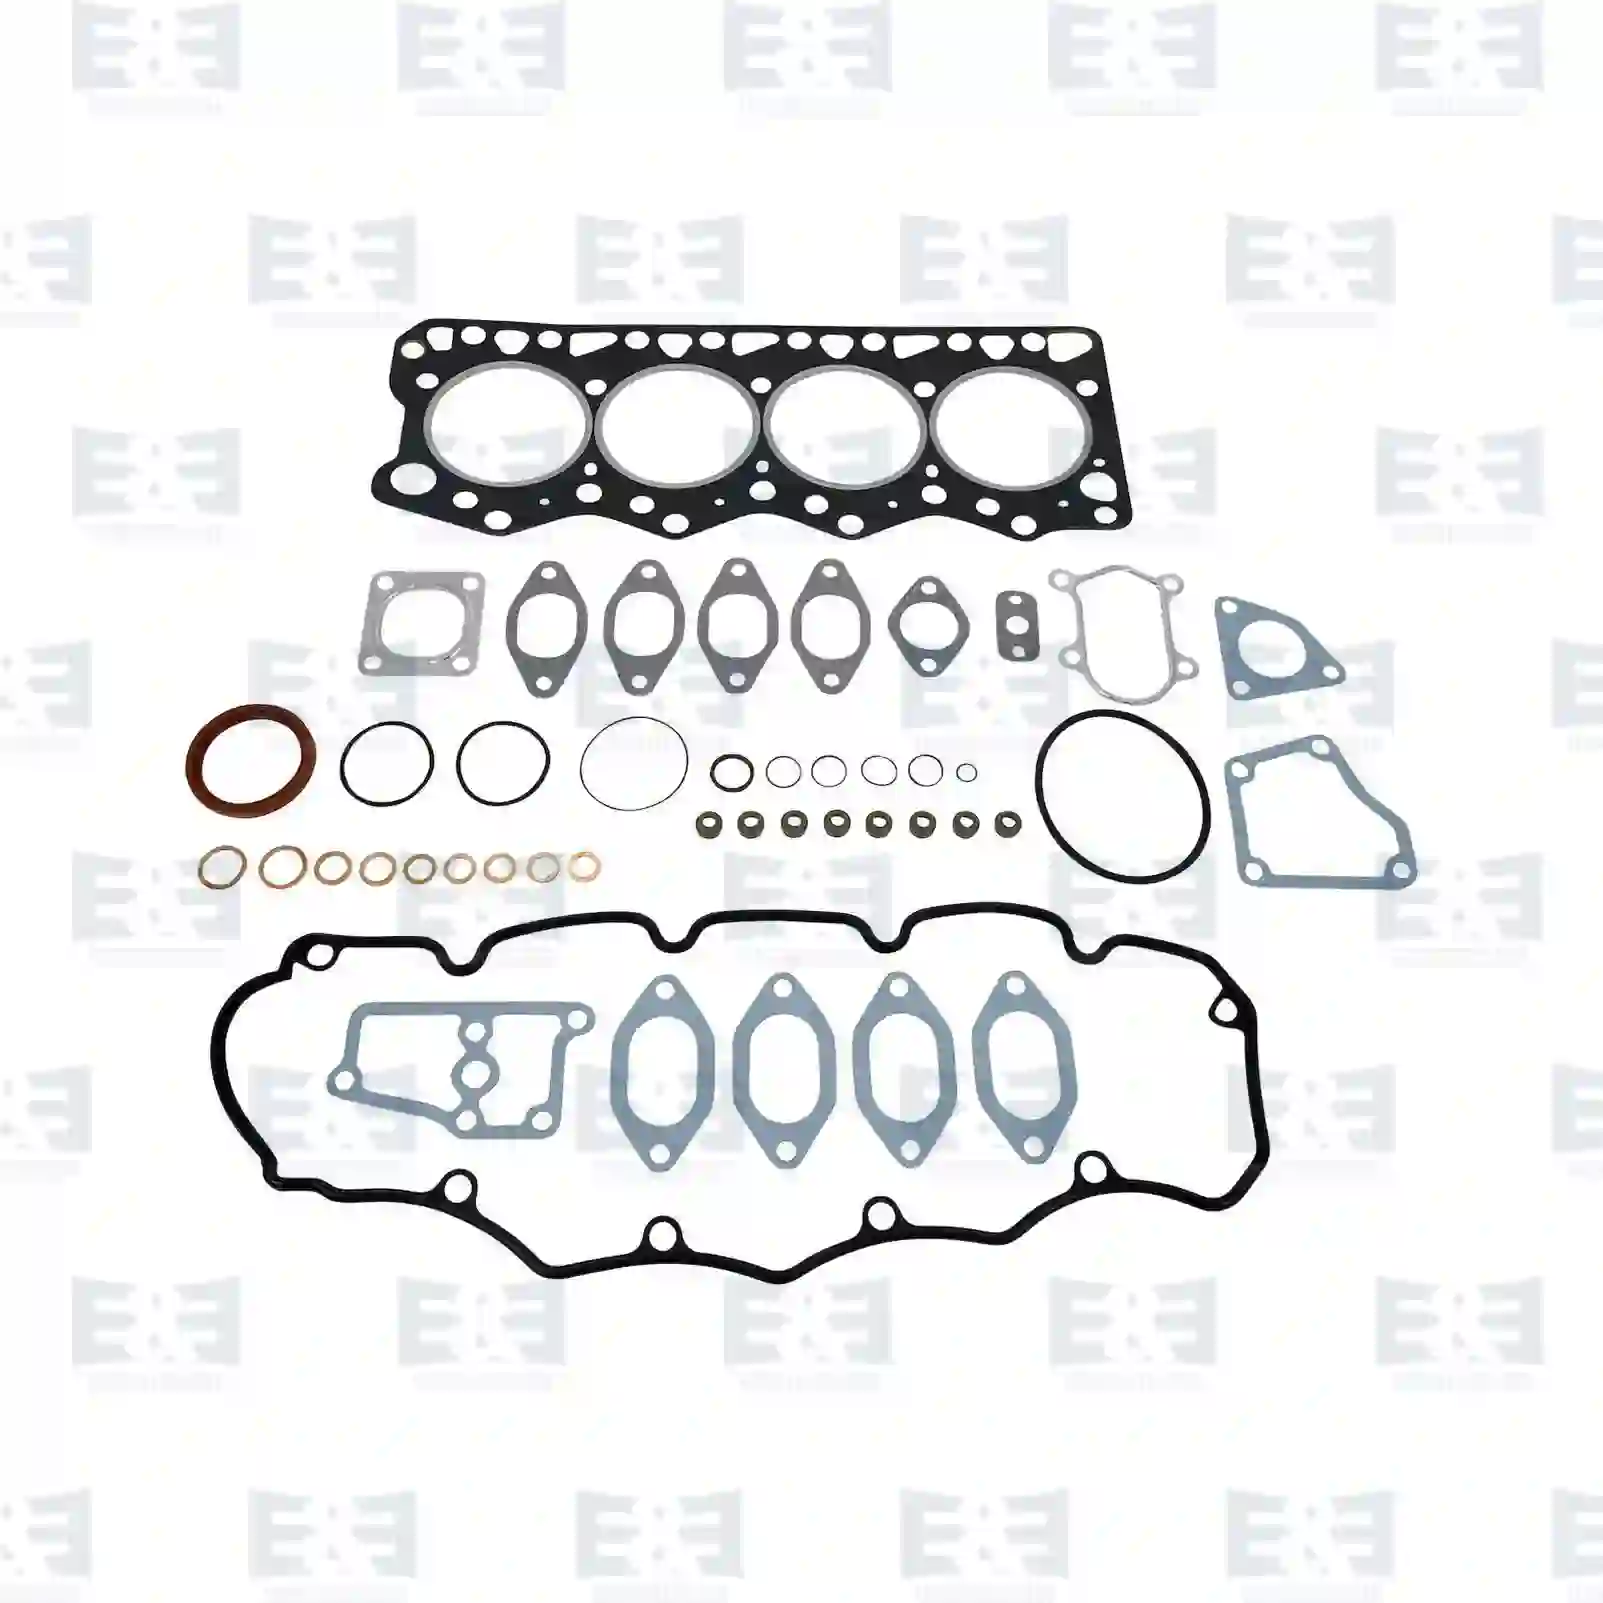 Cylinder head gasket kit, complete, 2E2209860, 0197Y3, 0197Y9, 500366528, 71713695, 71718012, 800366528, 99477119, 9162591, 500366528, 98492152, 99477119, 99477120, 4502790, 0197Y3, 0197Y9, 7701206362 ||  2E2209860 E&E Truck Spare Parts | Truck Spare Parts, Auotomotive Spare Parts Cylinder head gasket kit, complete, 2E2209860, 0197Y3, 0197Y9, 500366528, 71713695, 71718012, 800366528, 99477119, 9162591, 500366528, 98492152, 99477119, 99477120, 4502790, 0197Y3, 0197Y9, 7701206362 ||  2E2209860 E&E Truck Spare Parts | Truck Spare Parts, Auotomotive Spare Parts